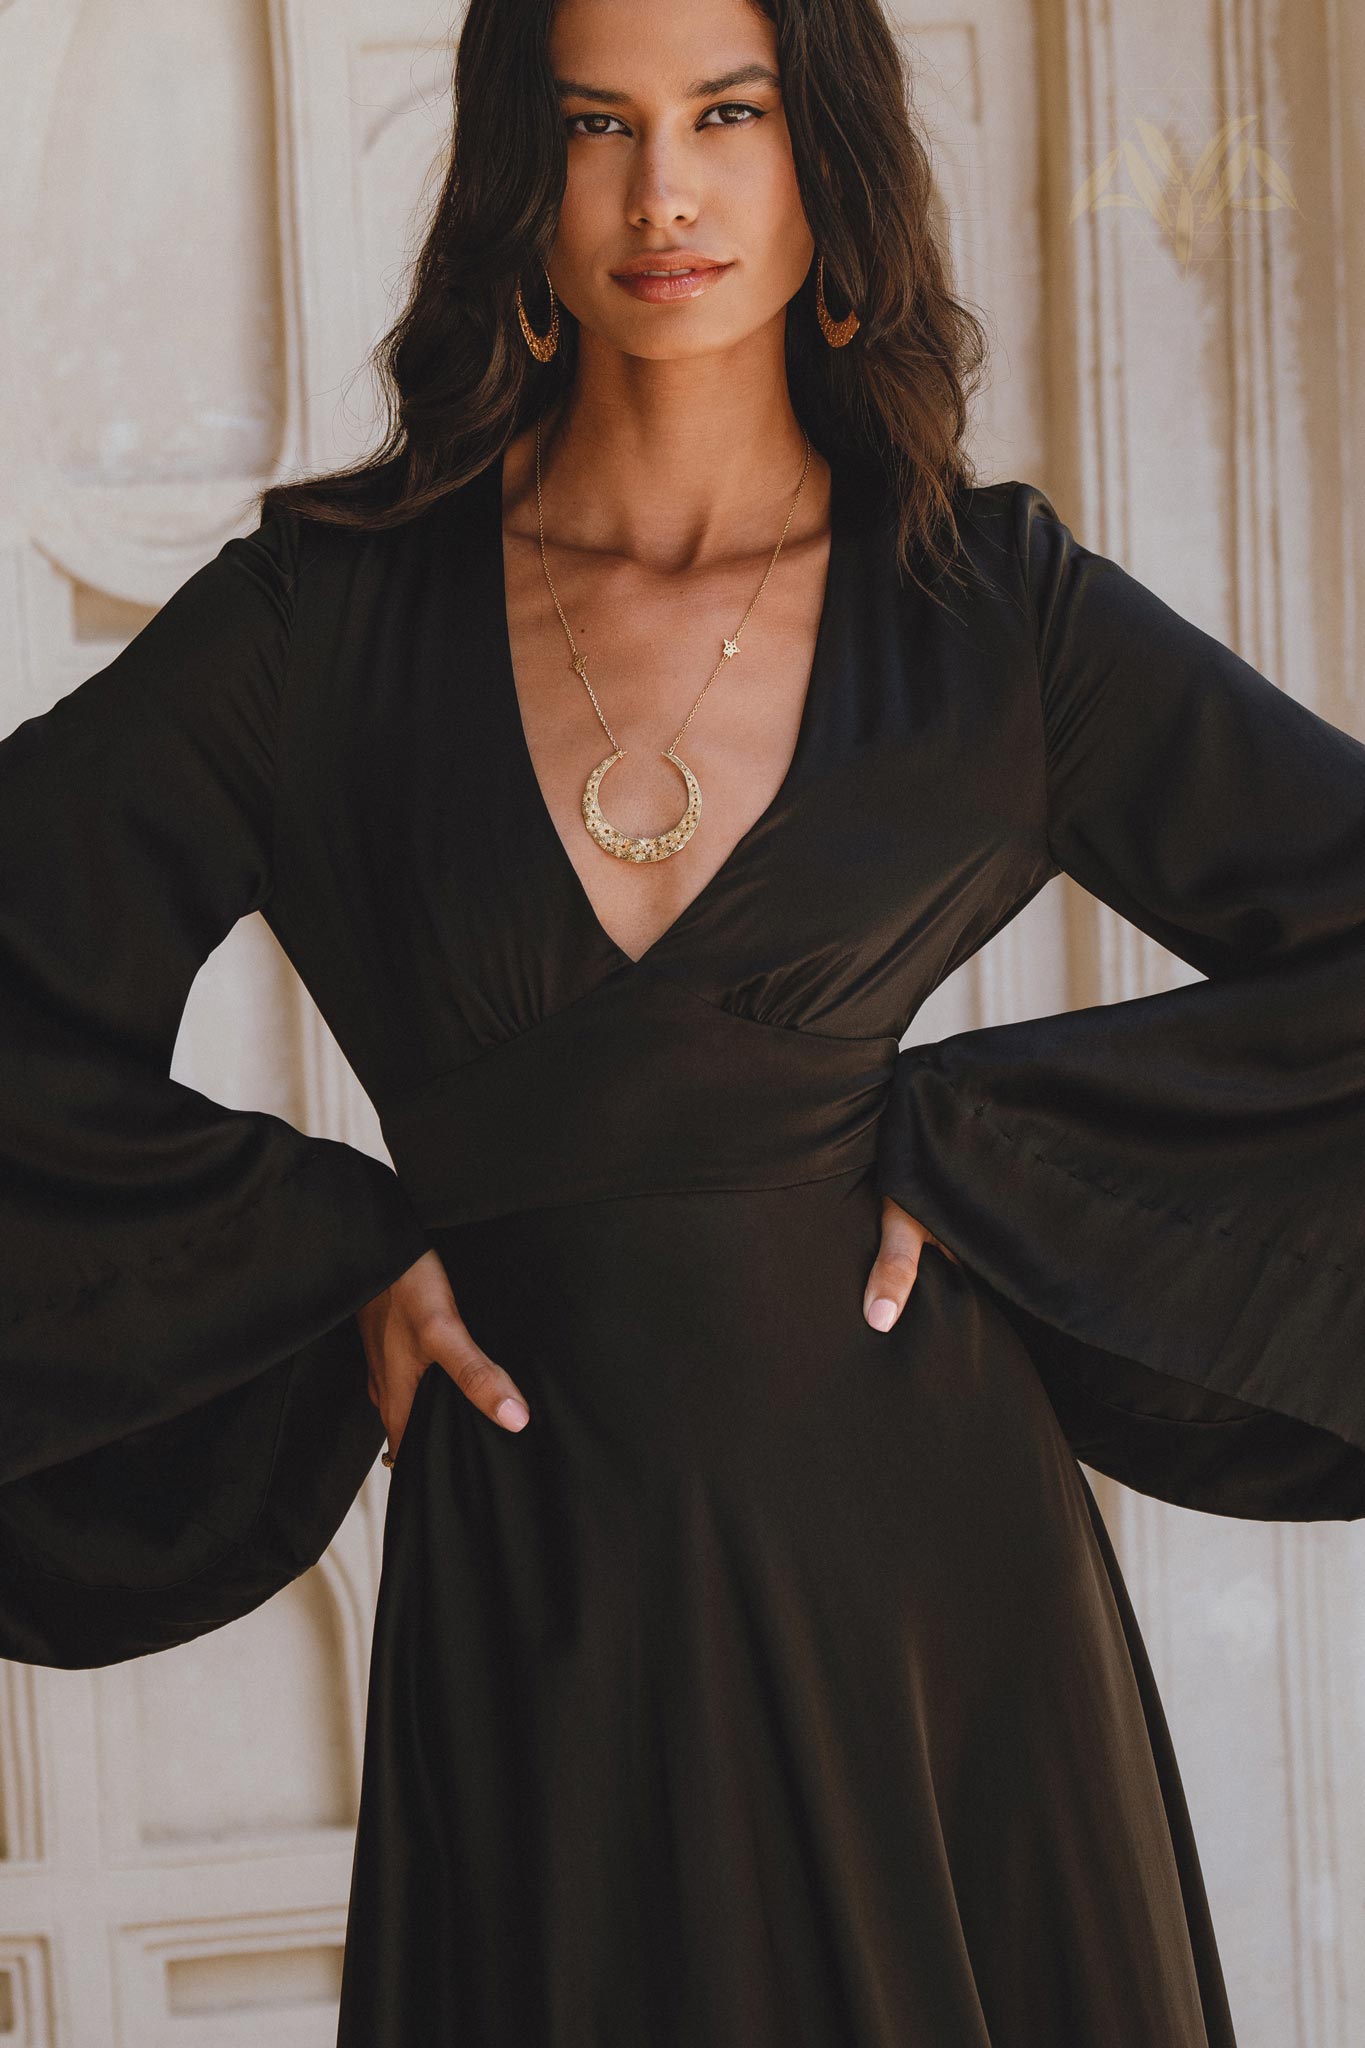 Black Gloss Goddess Dress with Bell Sleeves: A Bohemian maxi dress, ideal for evening events, crafted with ethically sourced Peace Silk.